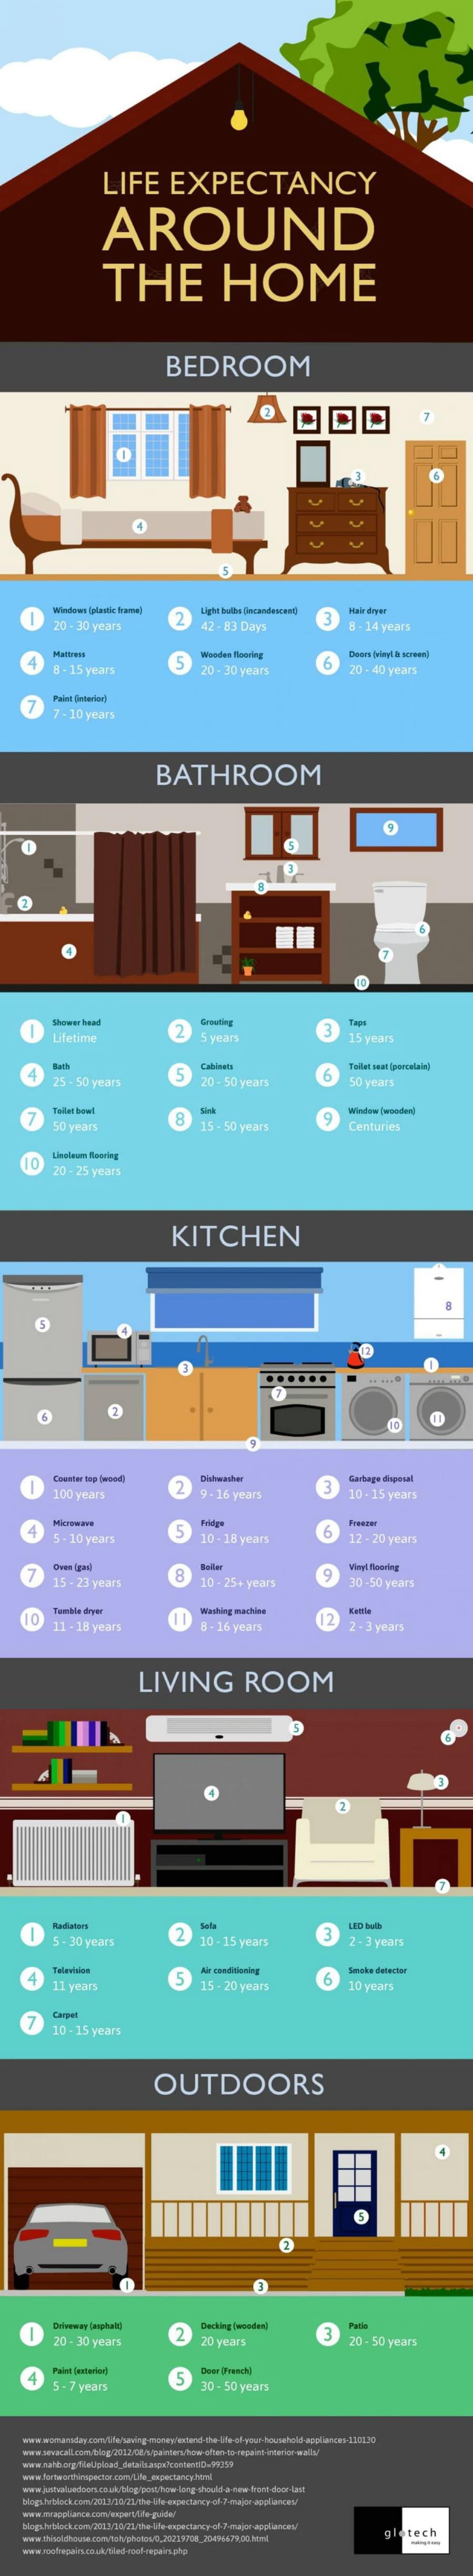 49. Life Expectancy Around the Home - 50 Amazingly Clever Cheat Sheets To Simplify Home Decorating Projects